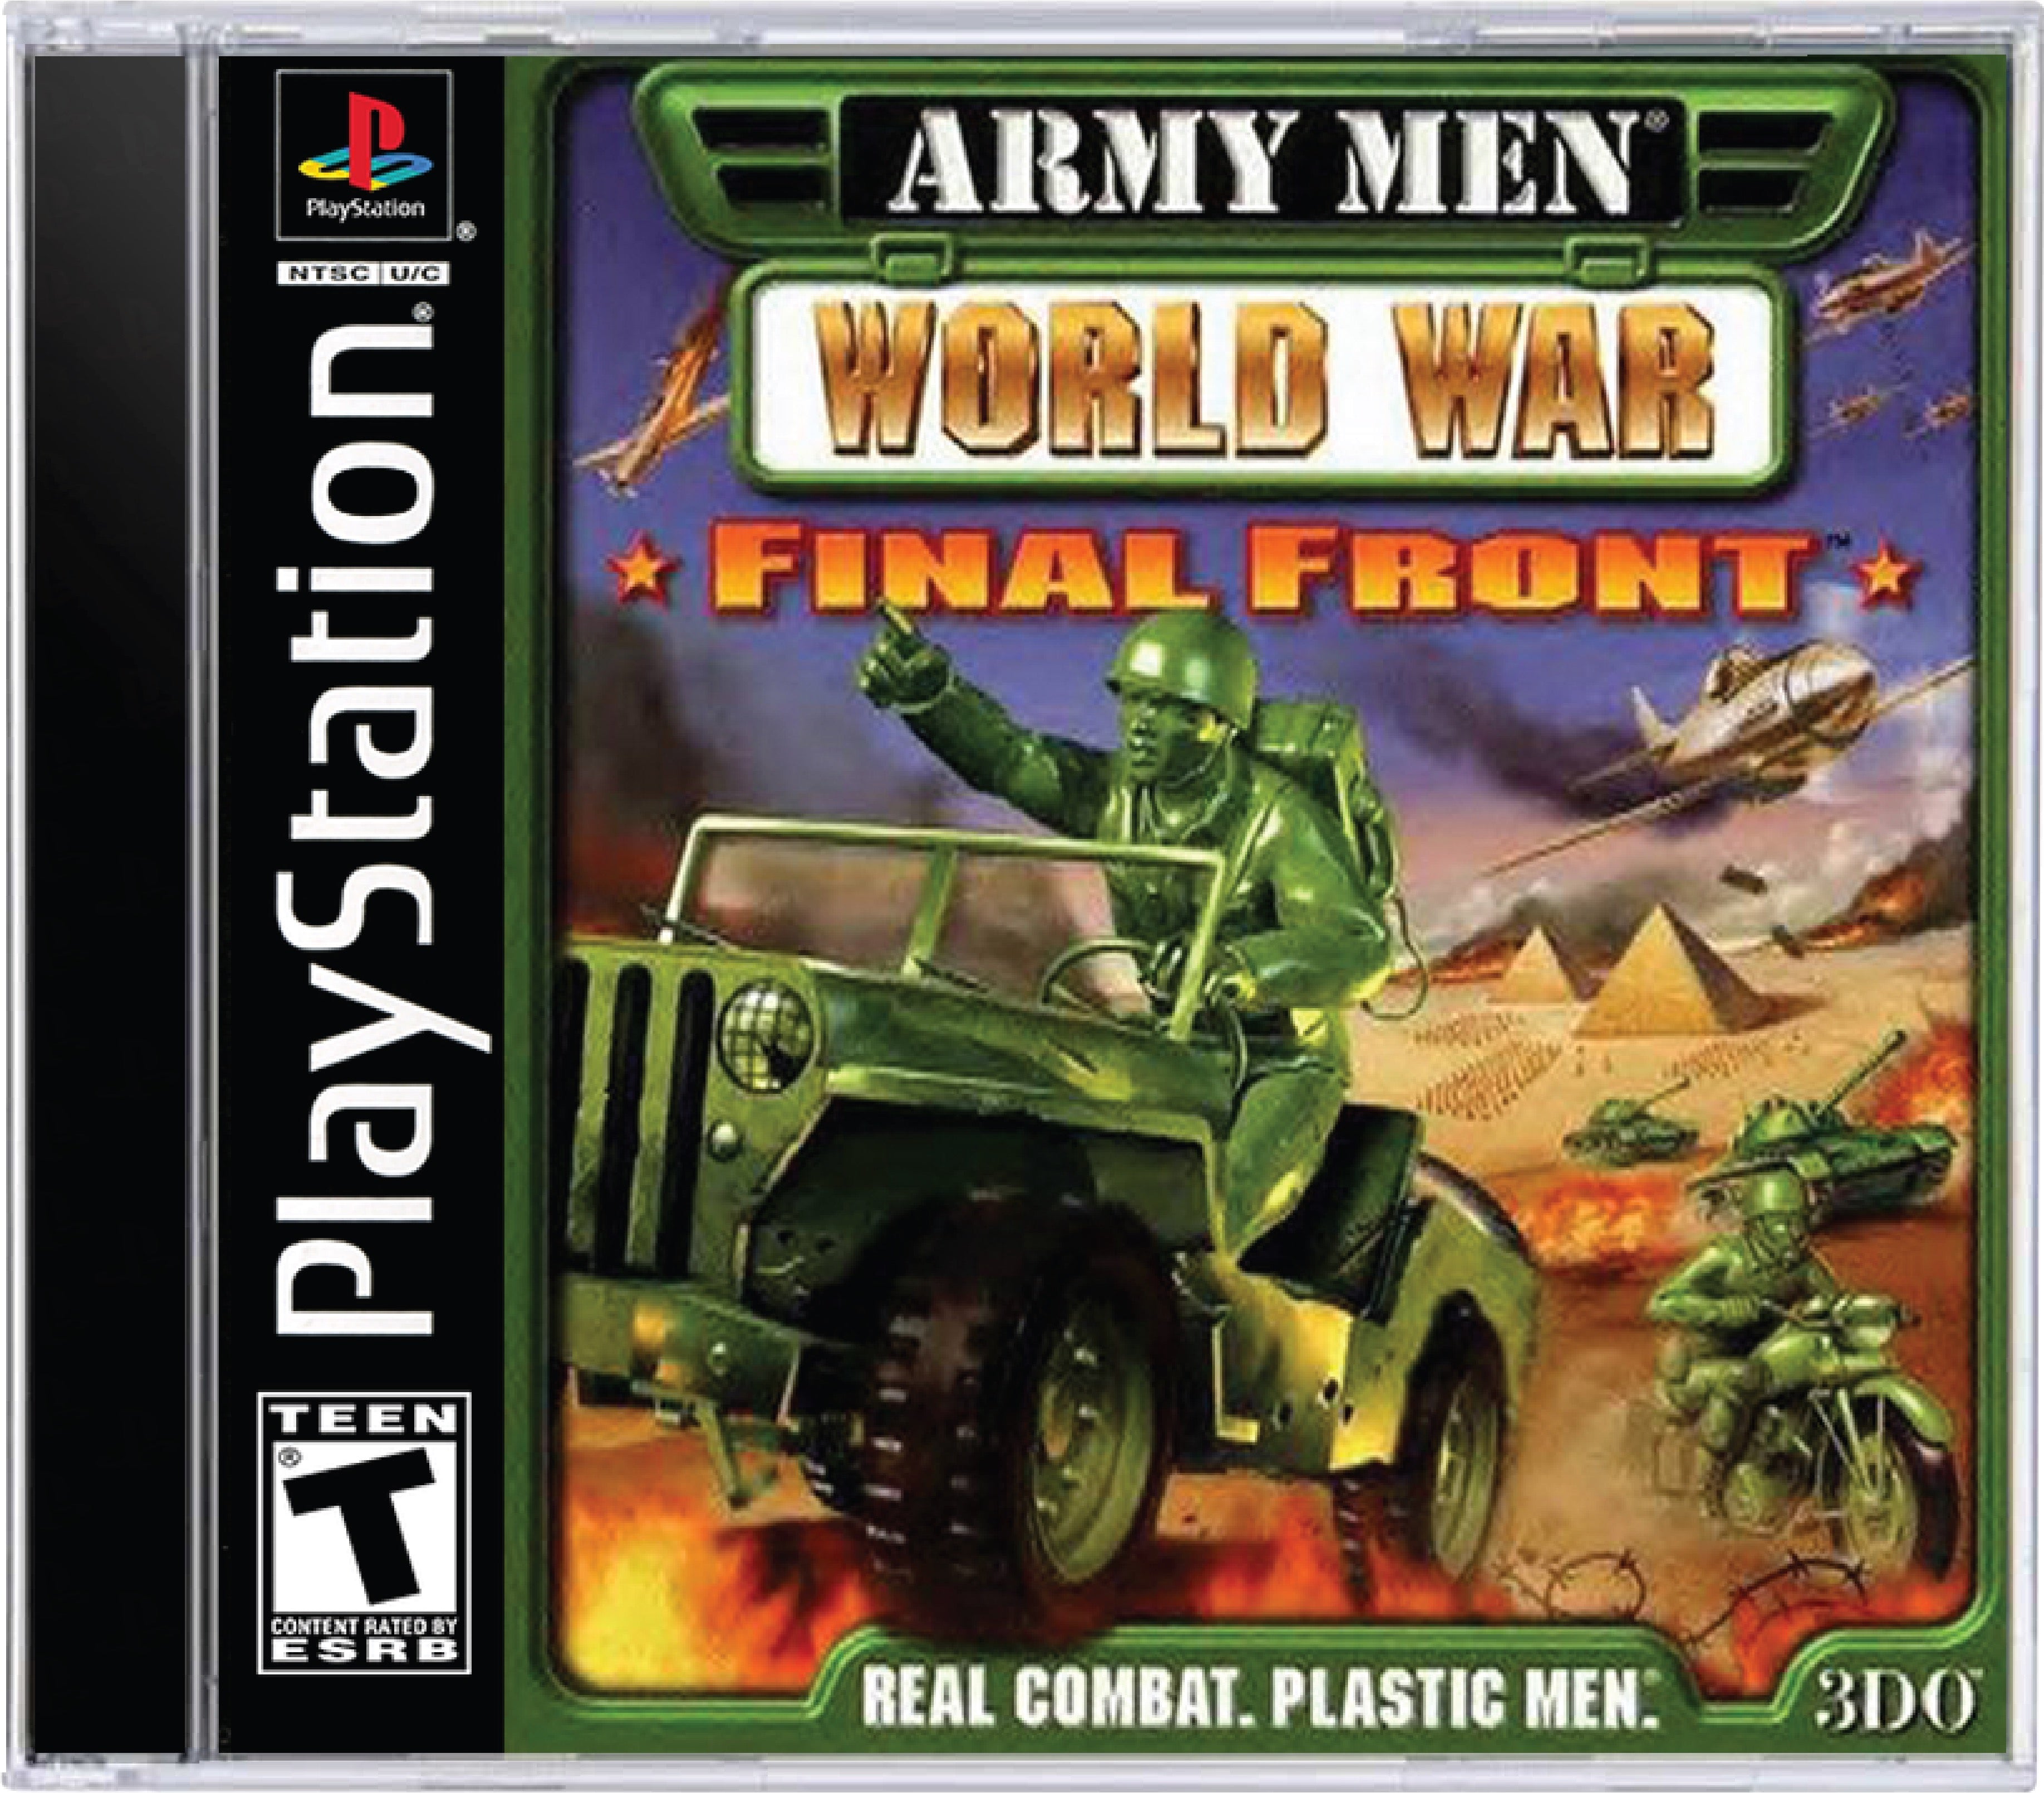 Army Men World War Final Front Cover Art and Product Photo